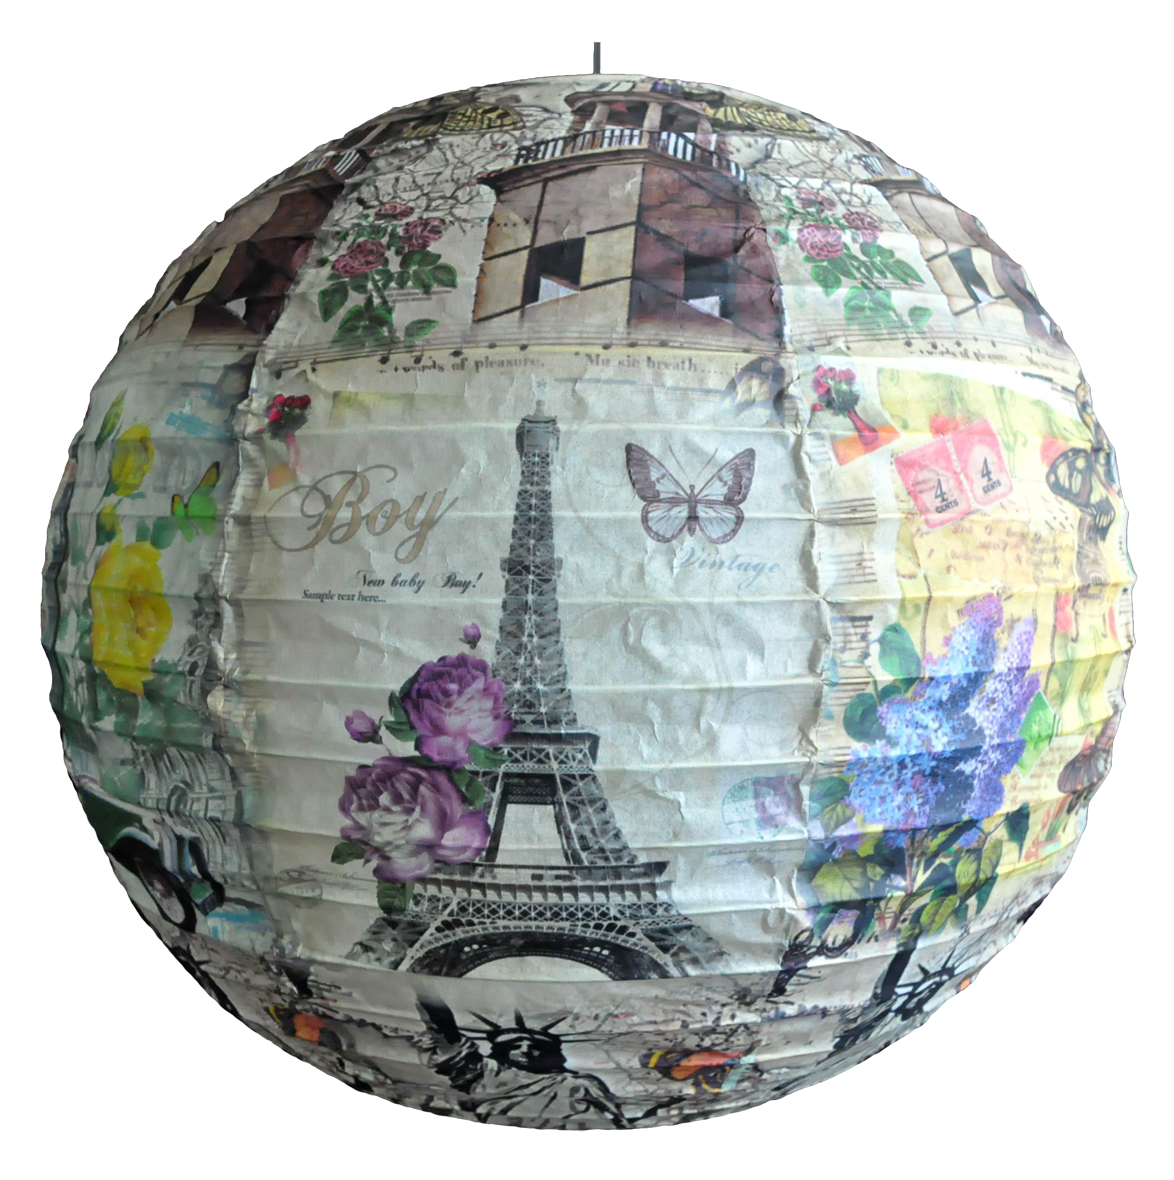 High Quality Chinese Paper Lampshades Paper Lanterns For for Indoor,Bedroom,Curtain,Patio,Lawn,Landscape